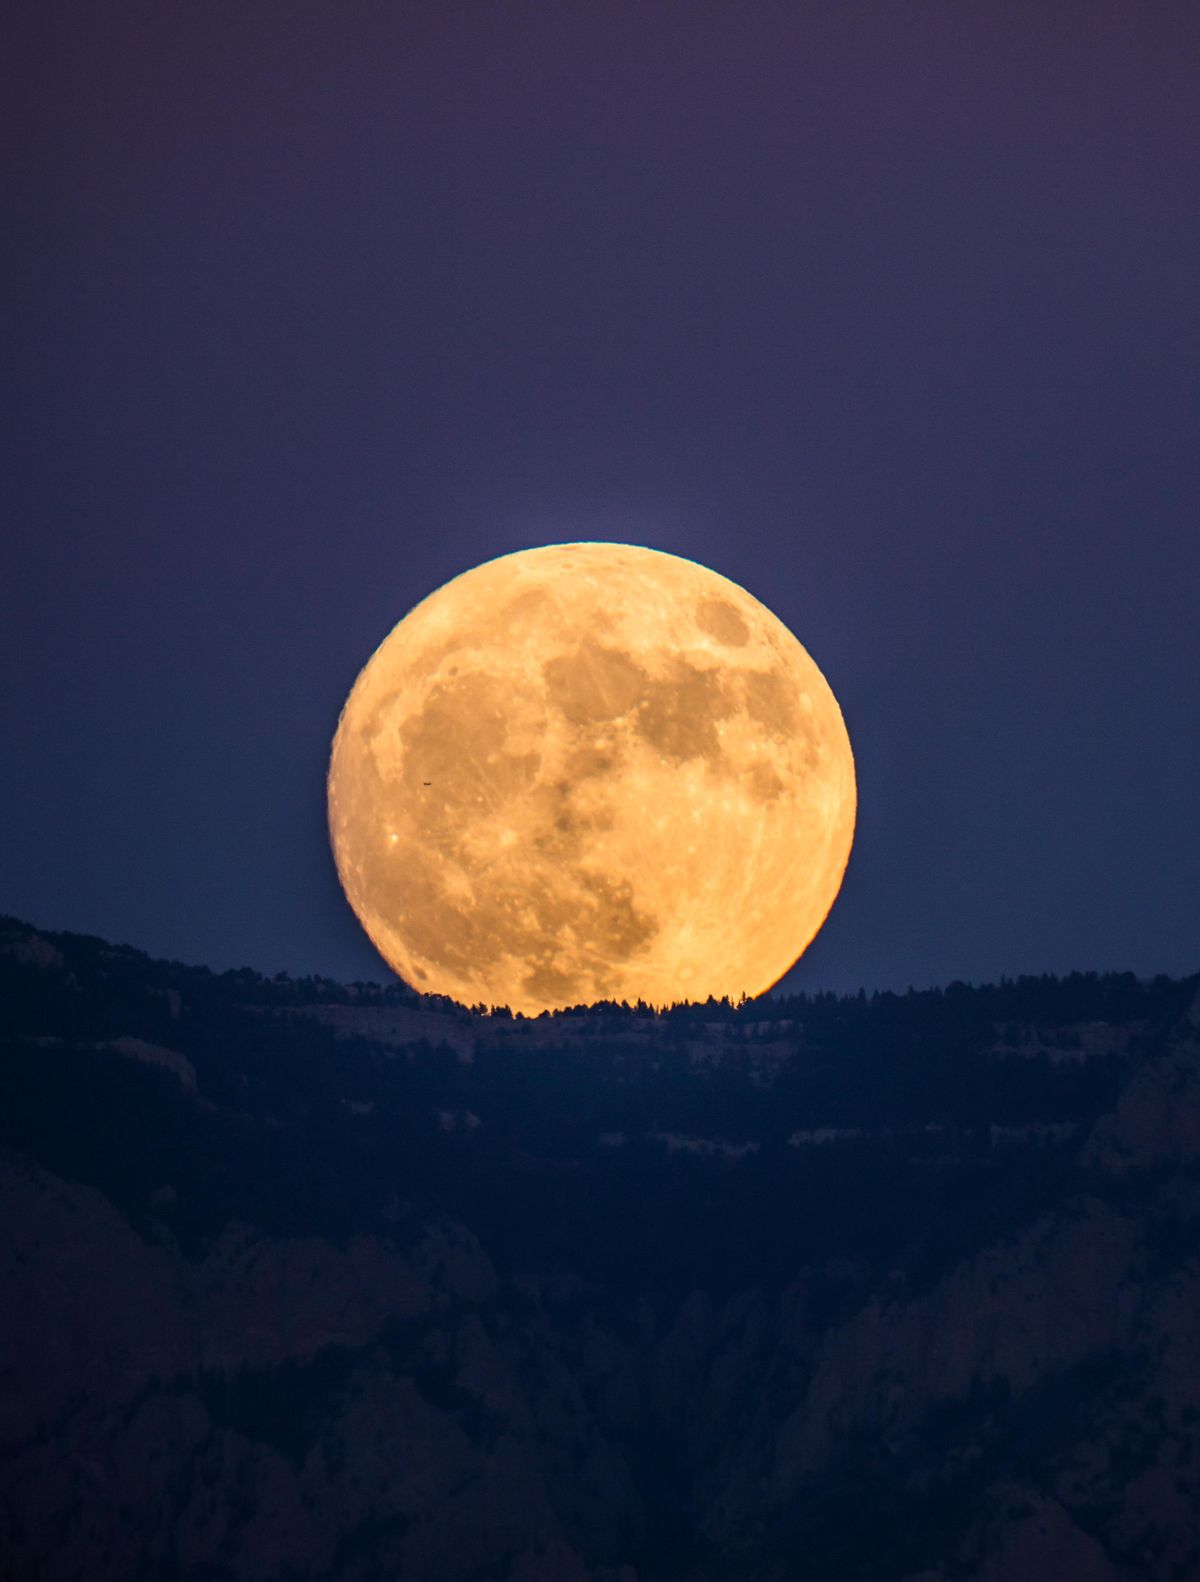 'Supermoon' Photos The Closest Full Moon Until 2034 in Pictures Space